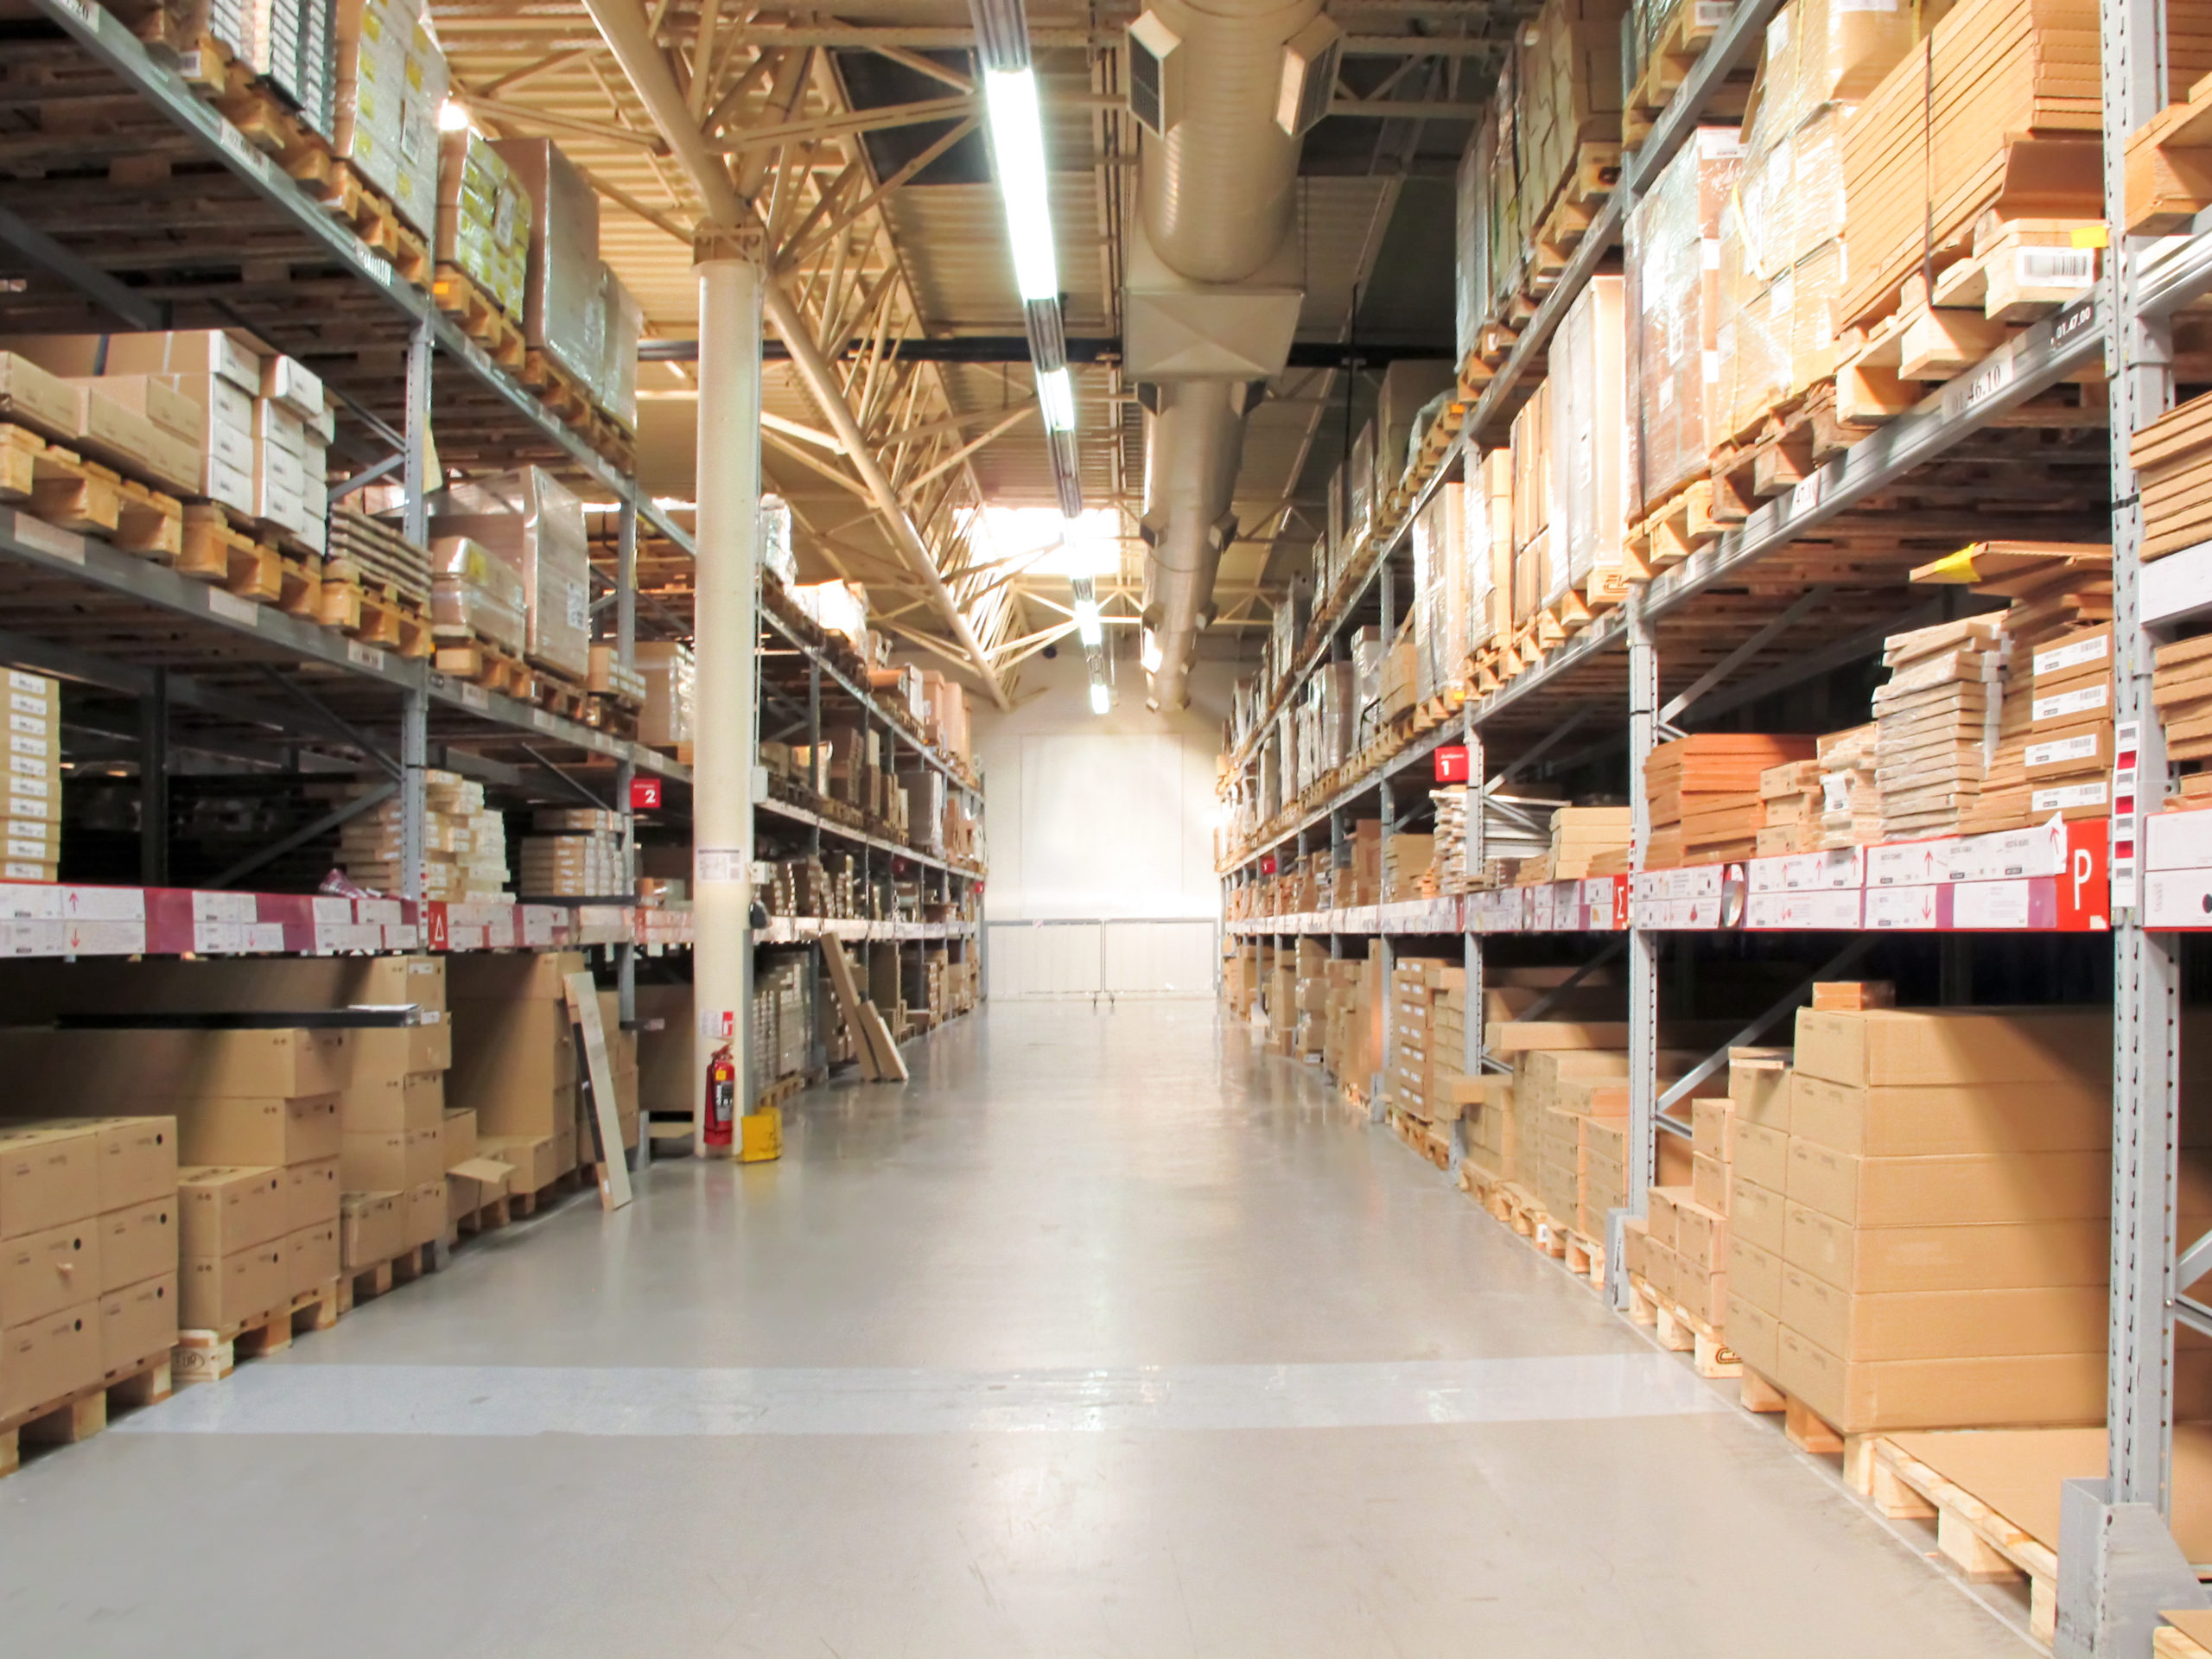 A concrete floor divides two rows of warehouse storage shelves.